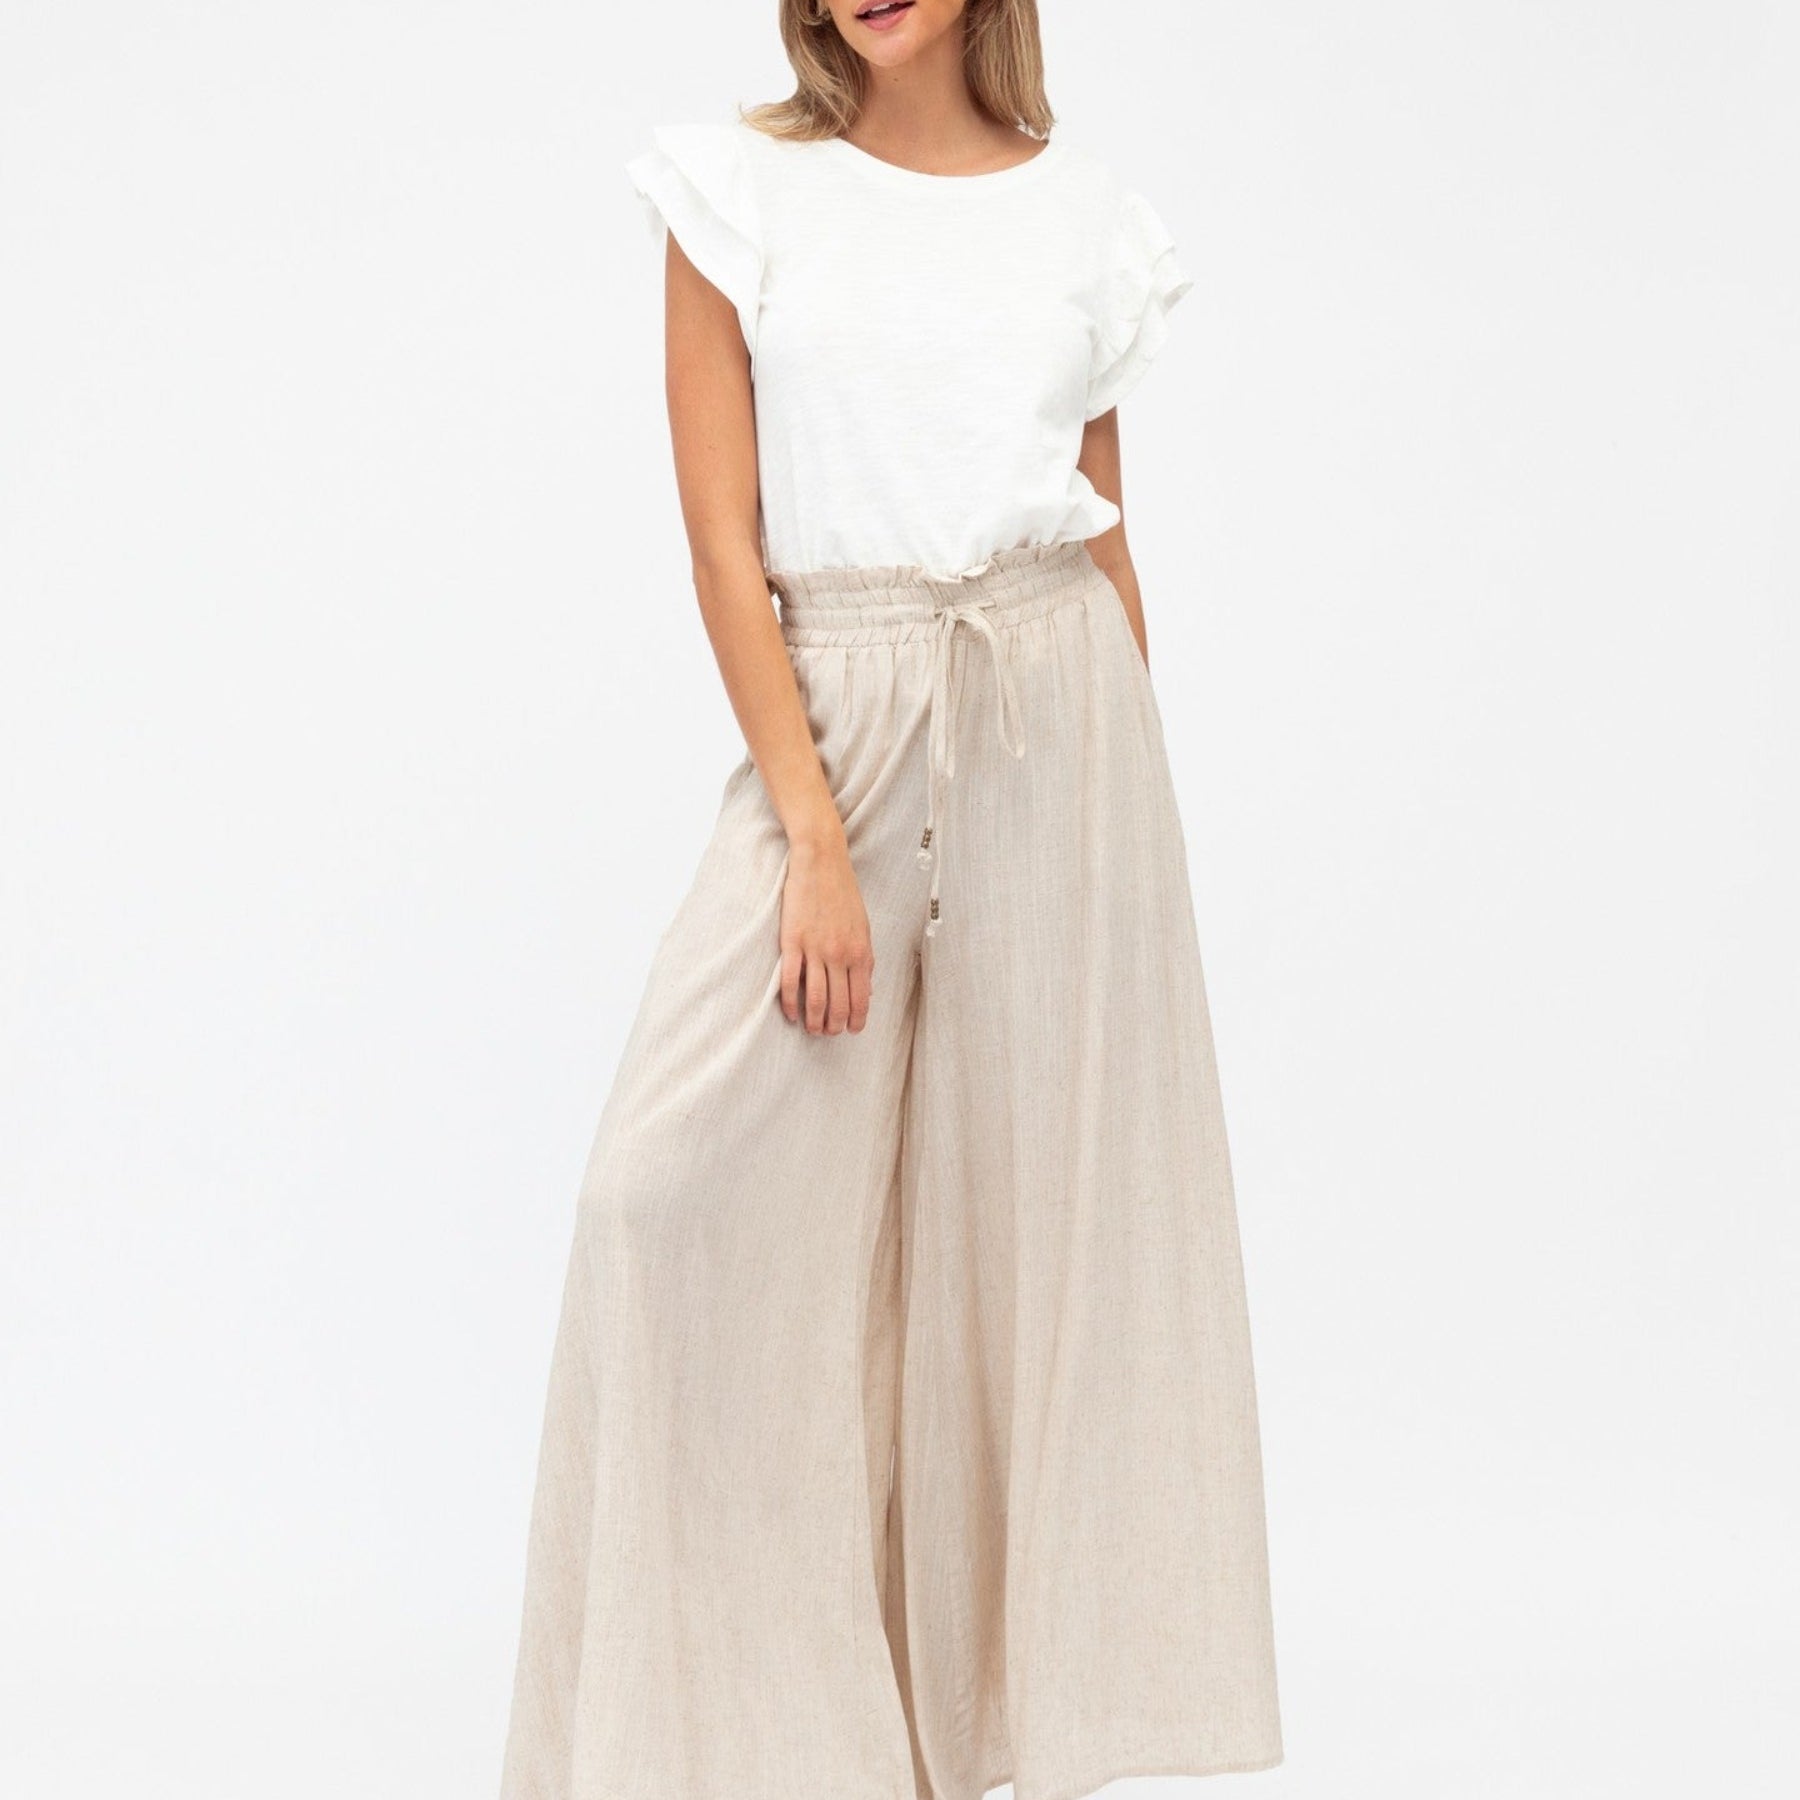 Neutral soft pant with elasticated waistband and self ties